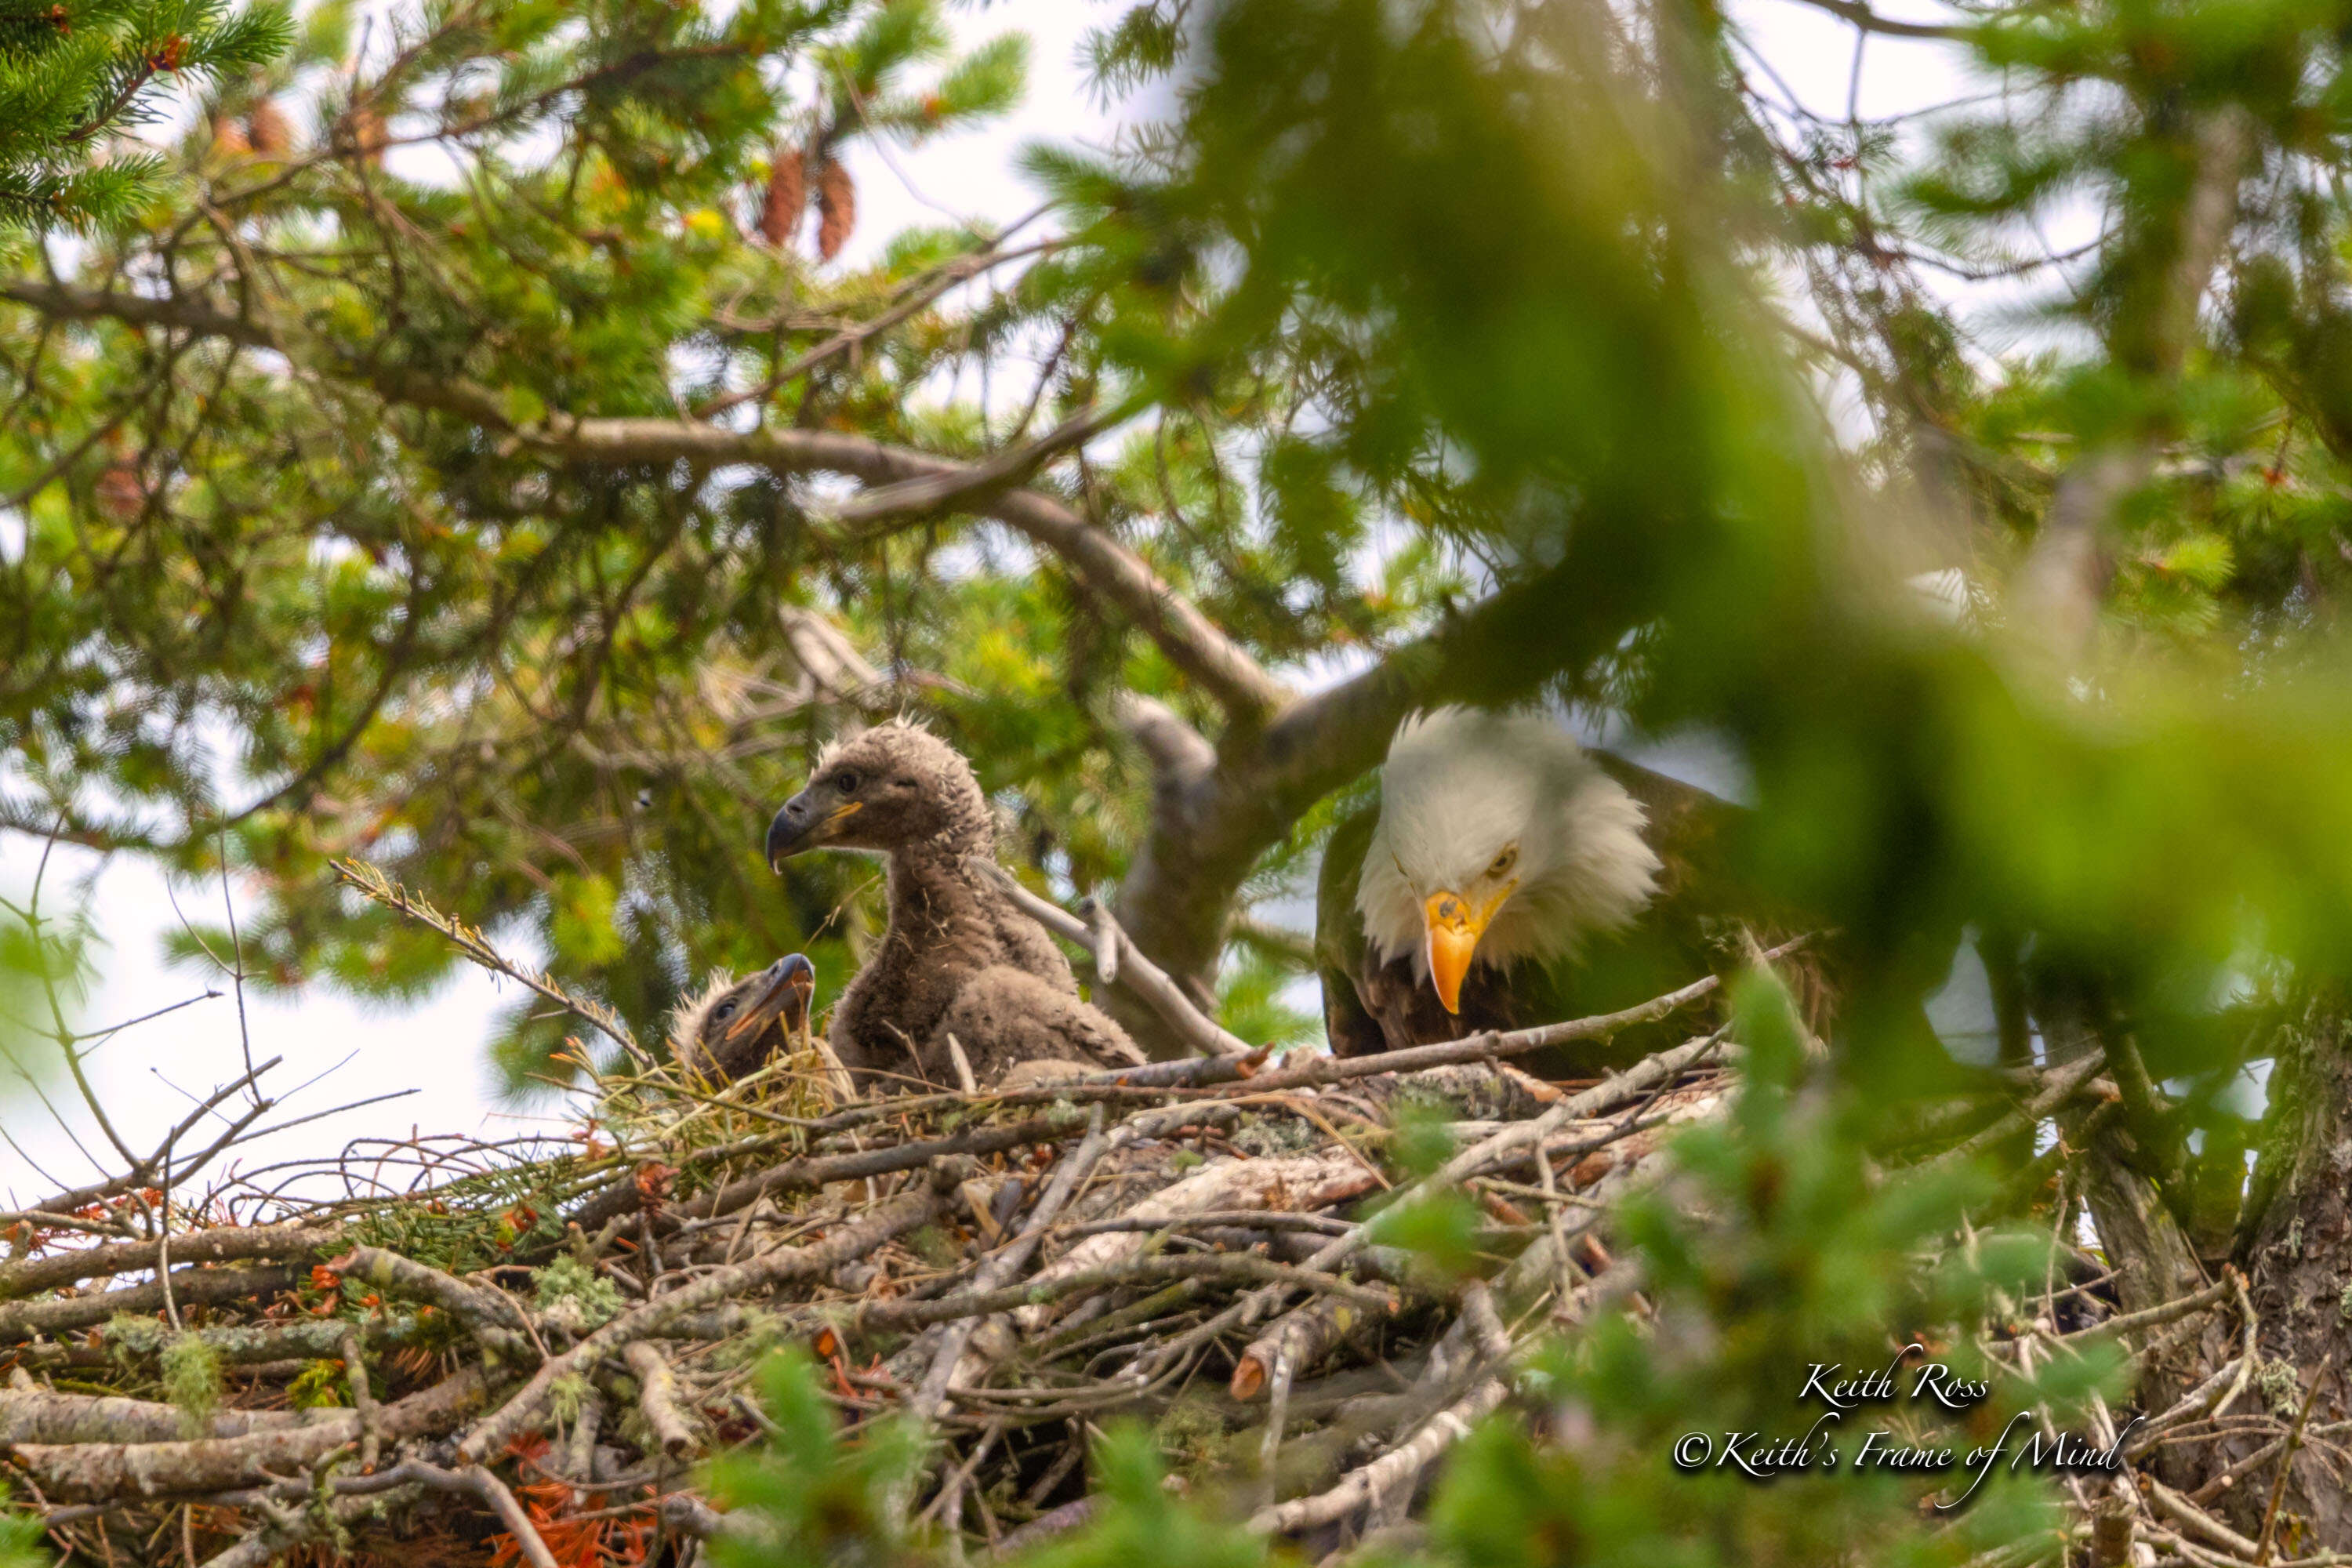 Eaglets in their nest with their mom